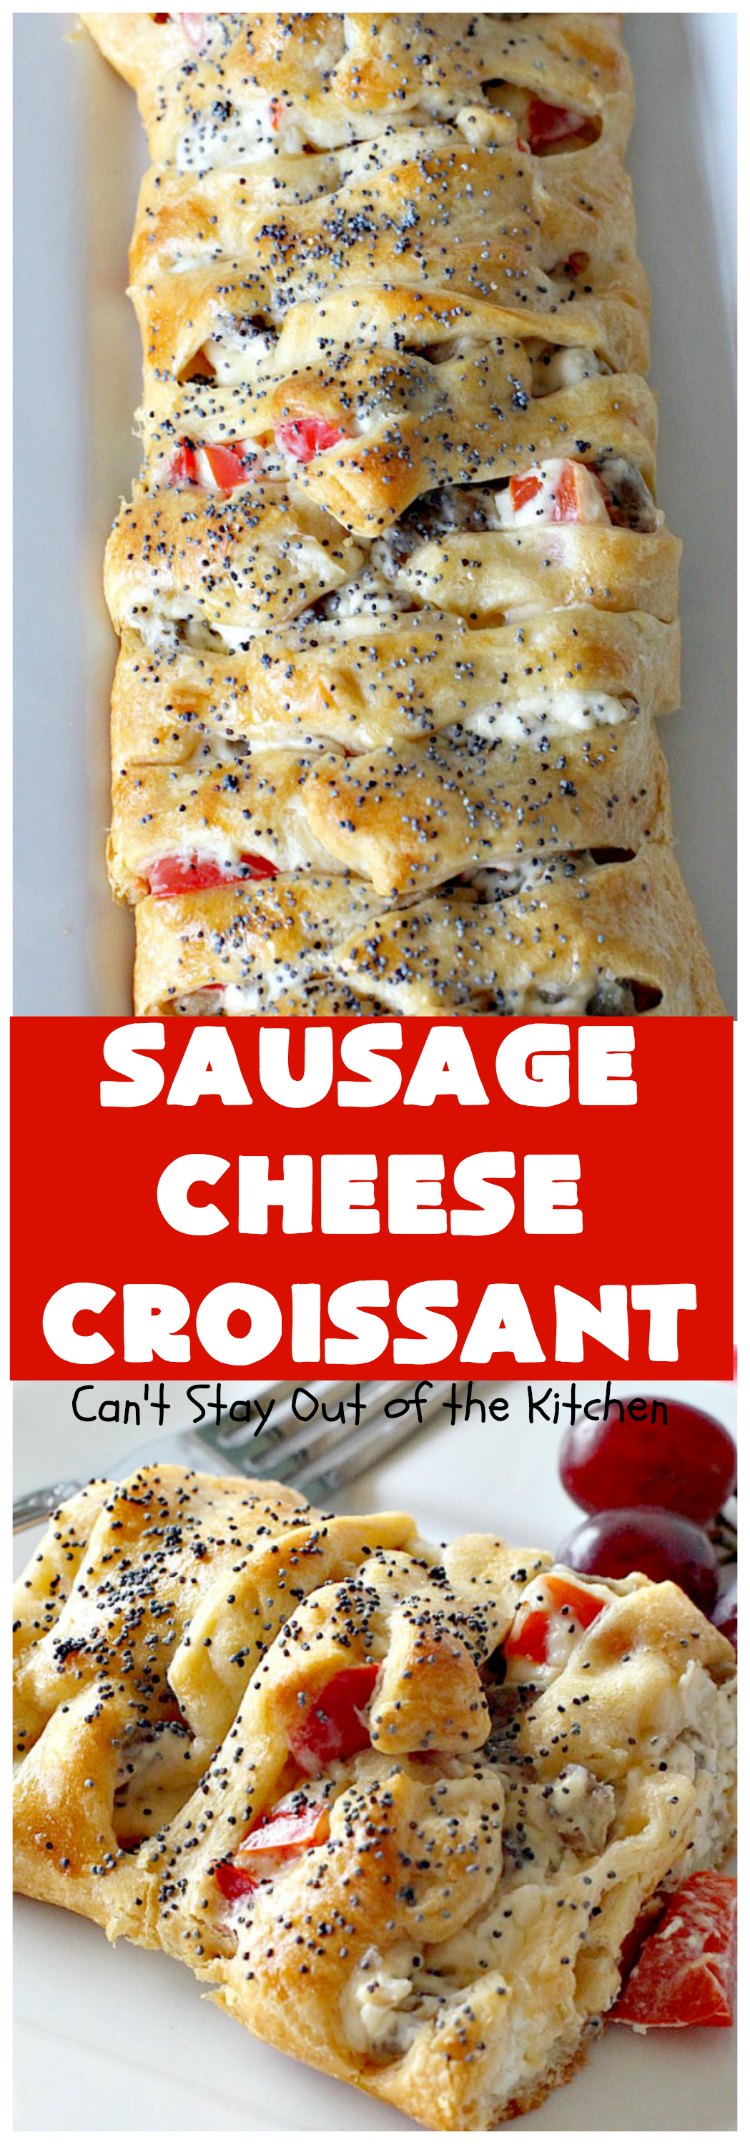 Sausage Cheese Croissants | Can't Stay Out of the Kitchen